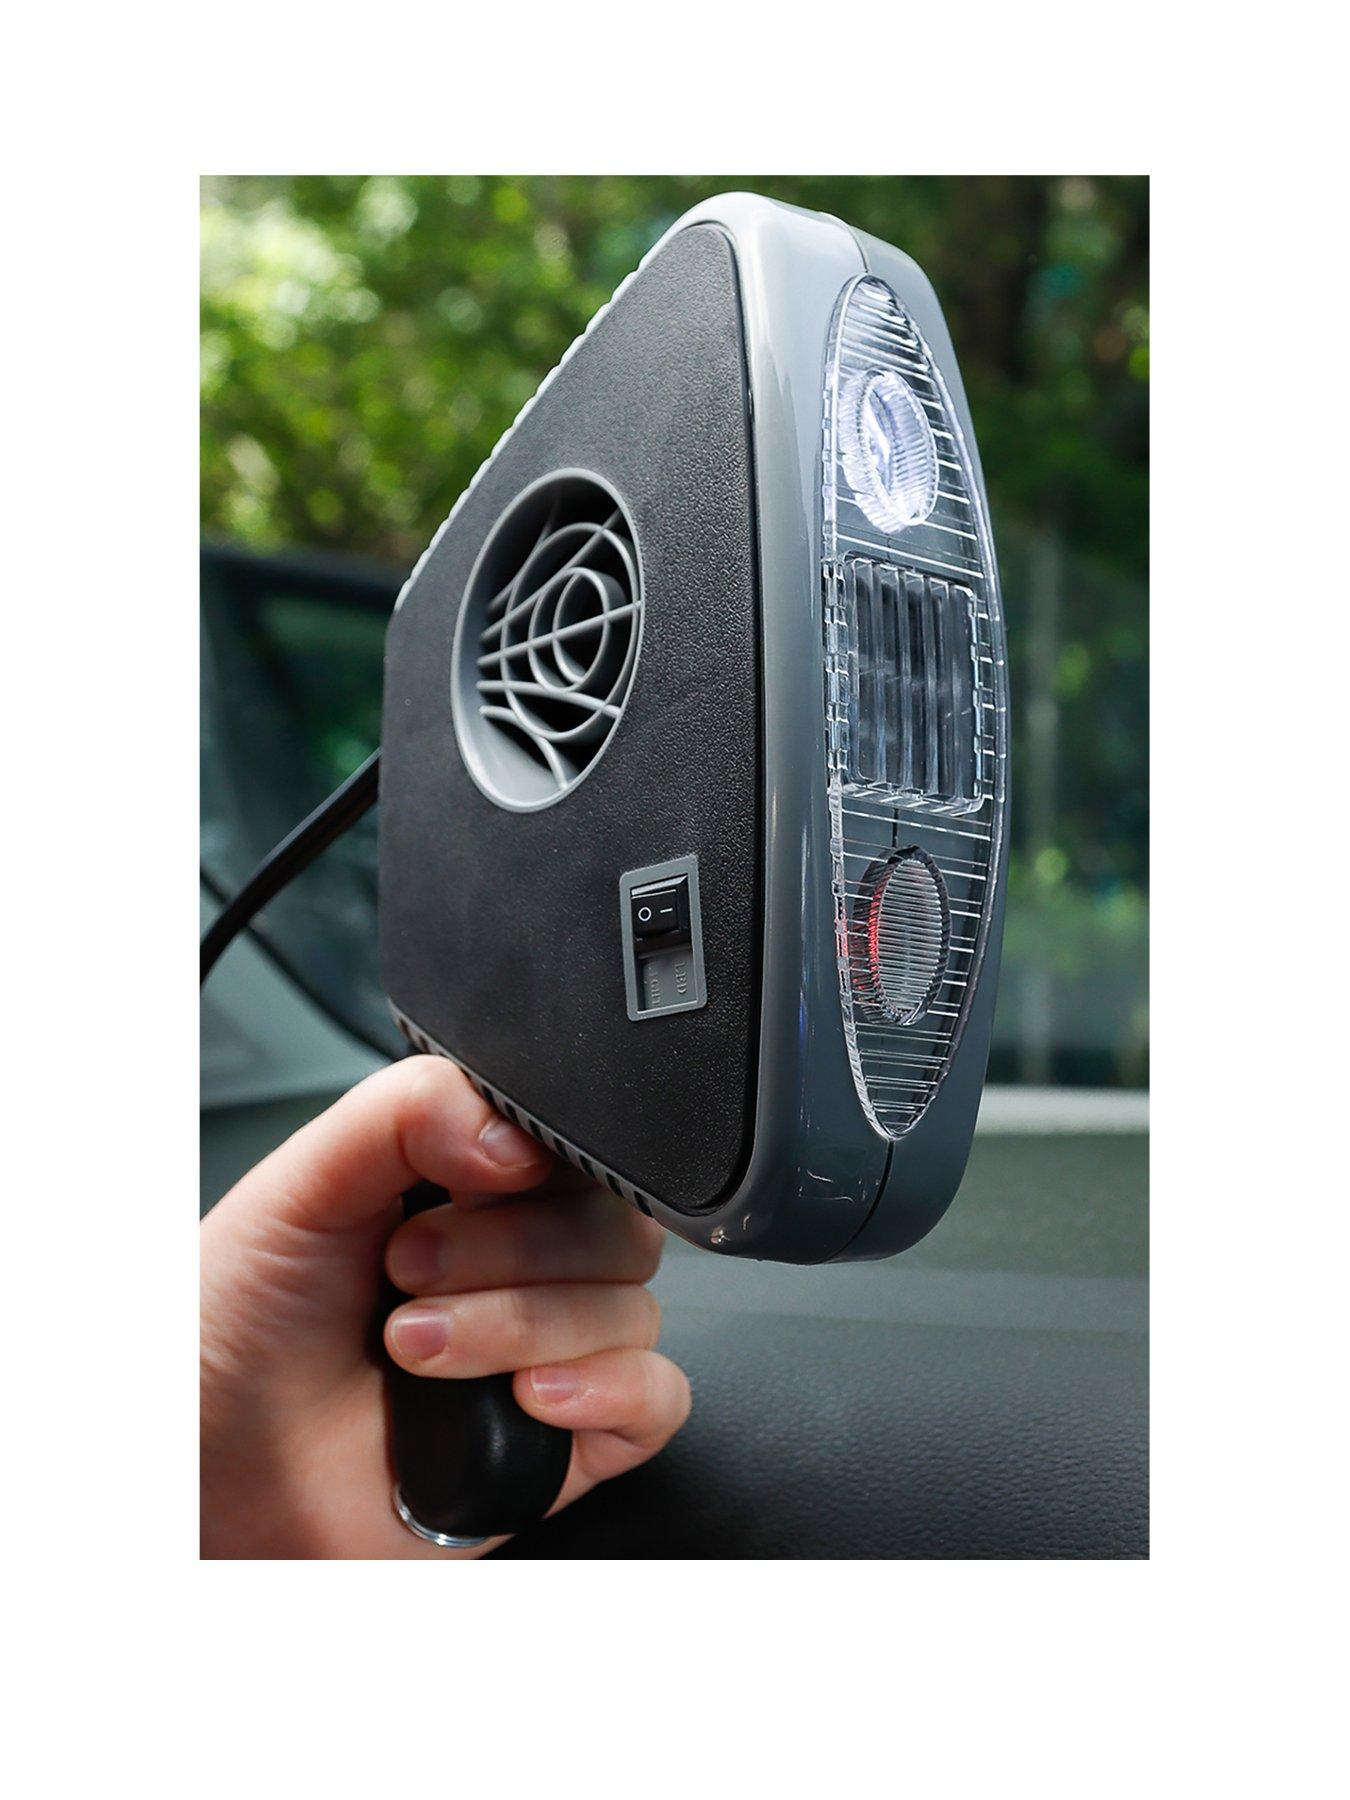 Streetwize 12v Auto Heater Defroster with Light